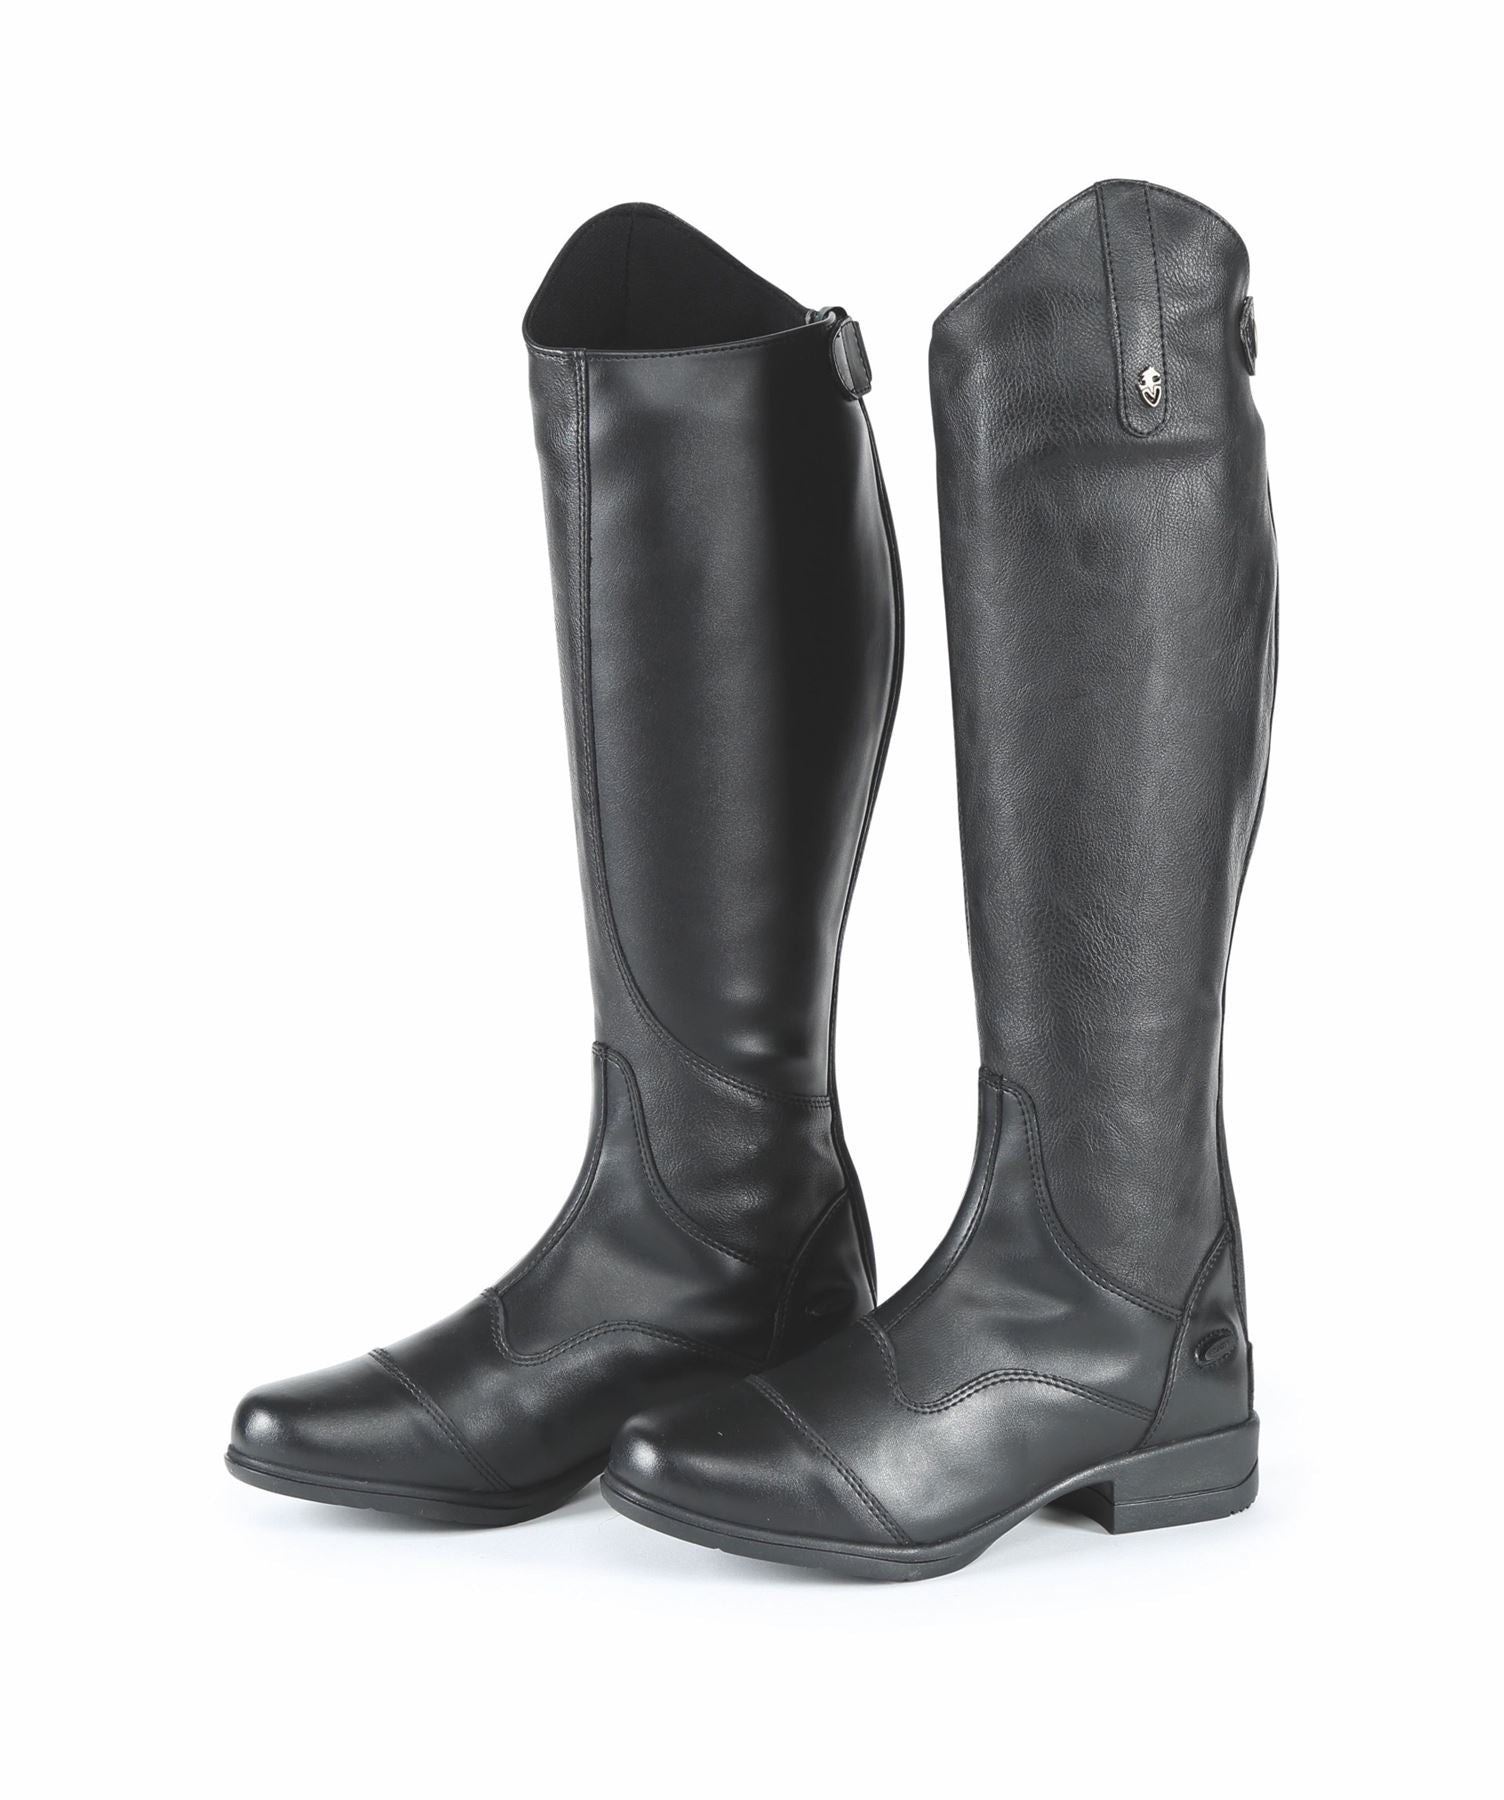 Shires Moretta Marcia Riding Boots - Adult - Just Horse Riders